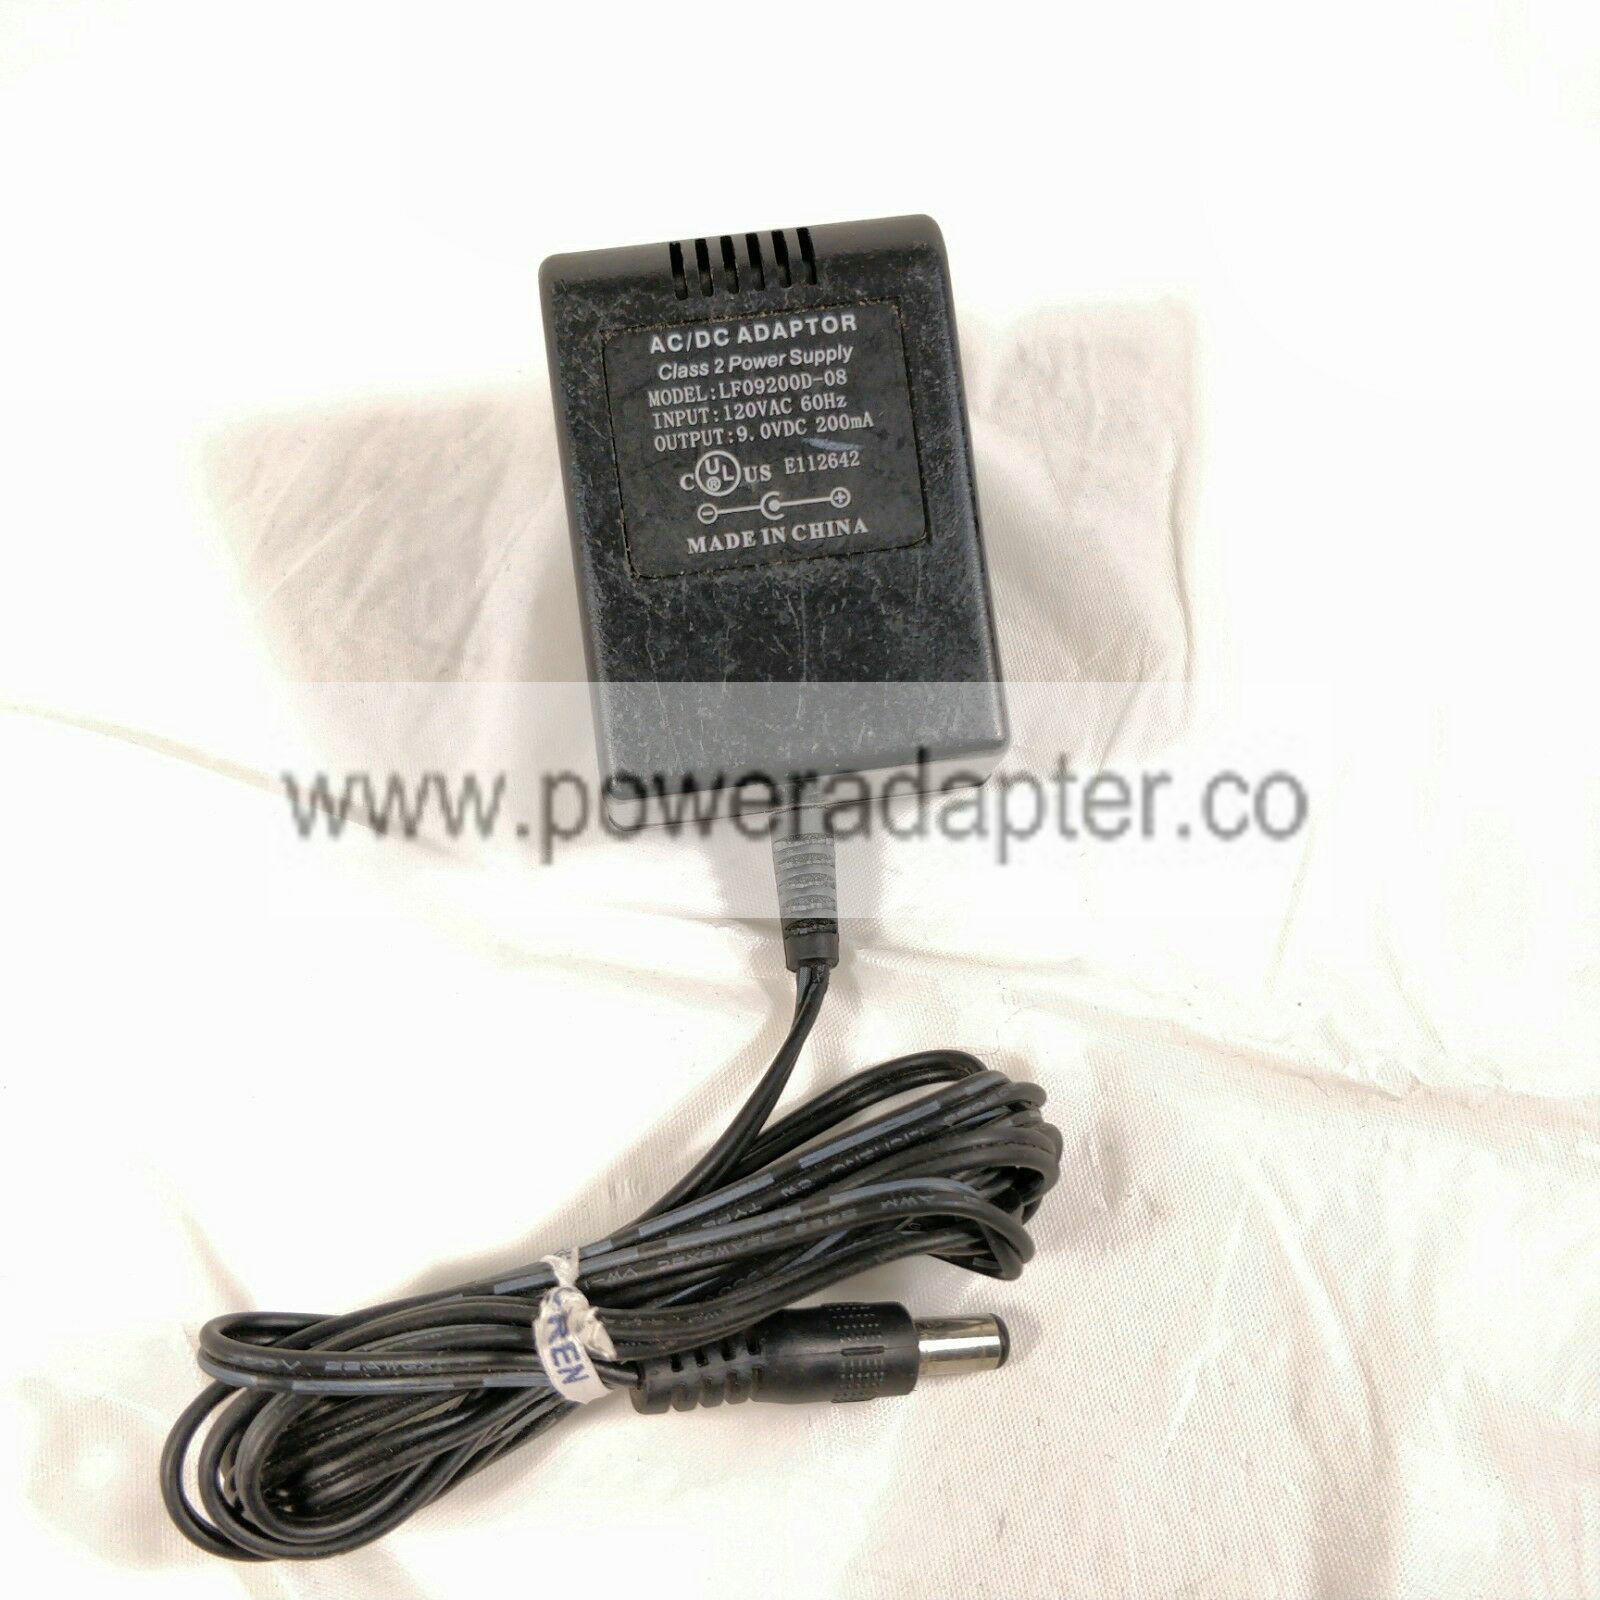 LF09200D-08 AC/DC Power Supply Adapter Charger Output 9V 200mA Gyro H1 Quick Info: Great Power supply for Great Price